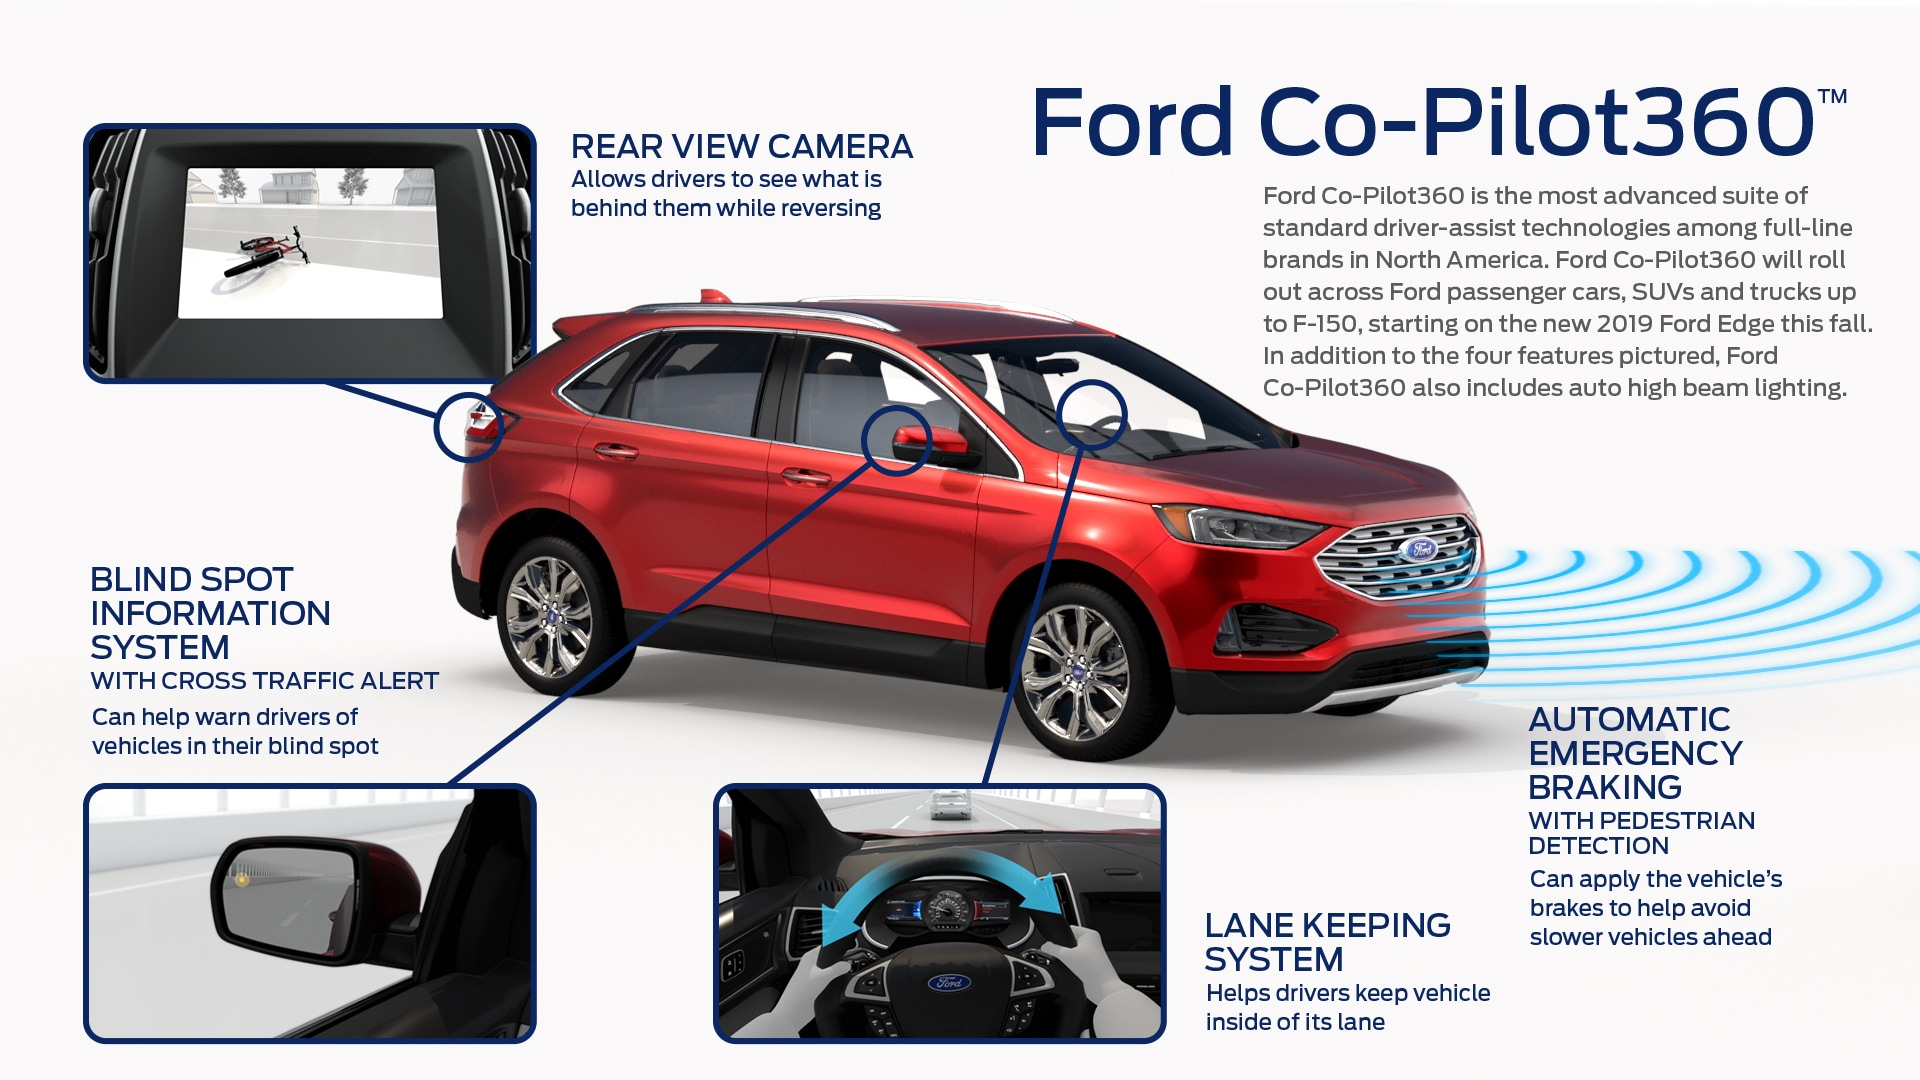 Ford Co-Pilot360™: Most Advanced Suite of Standard Driver-Assist